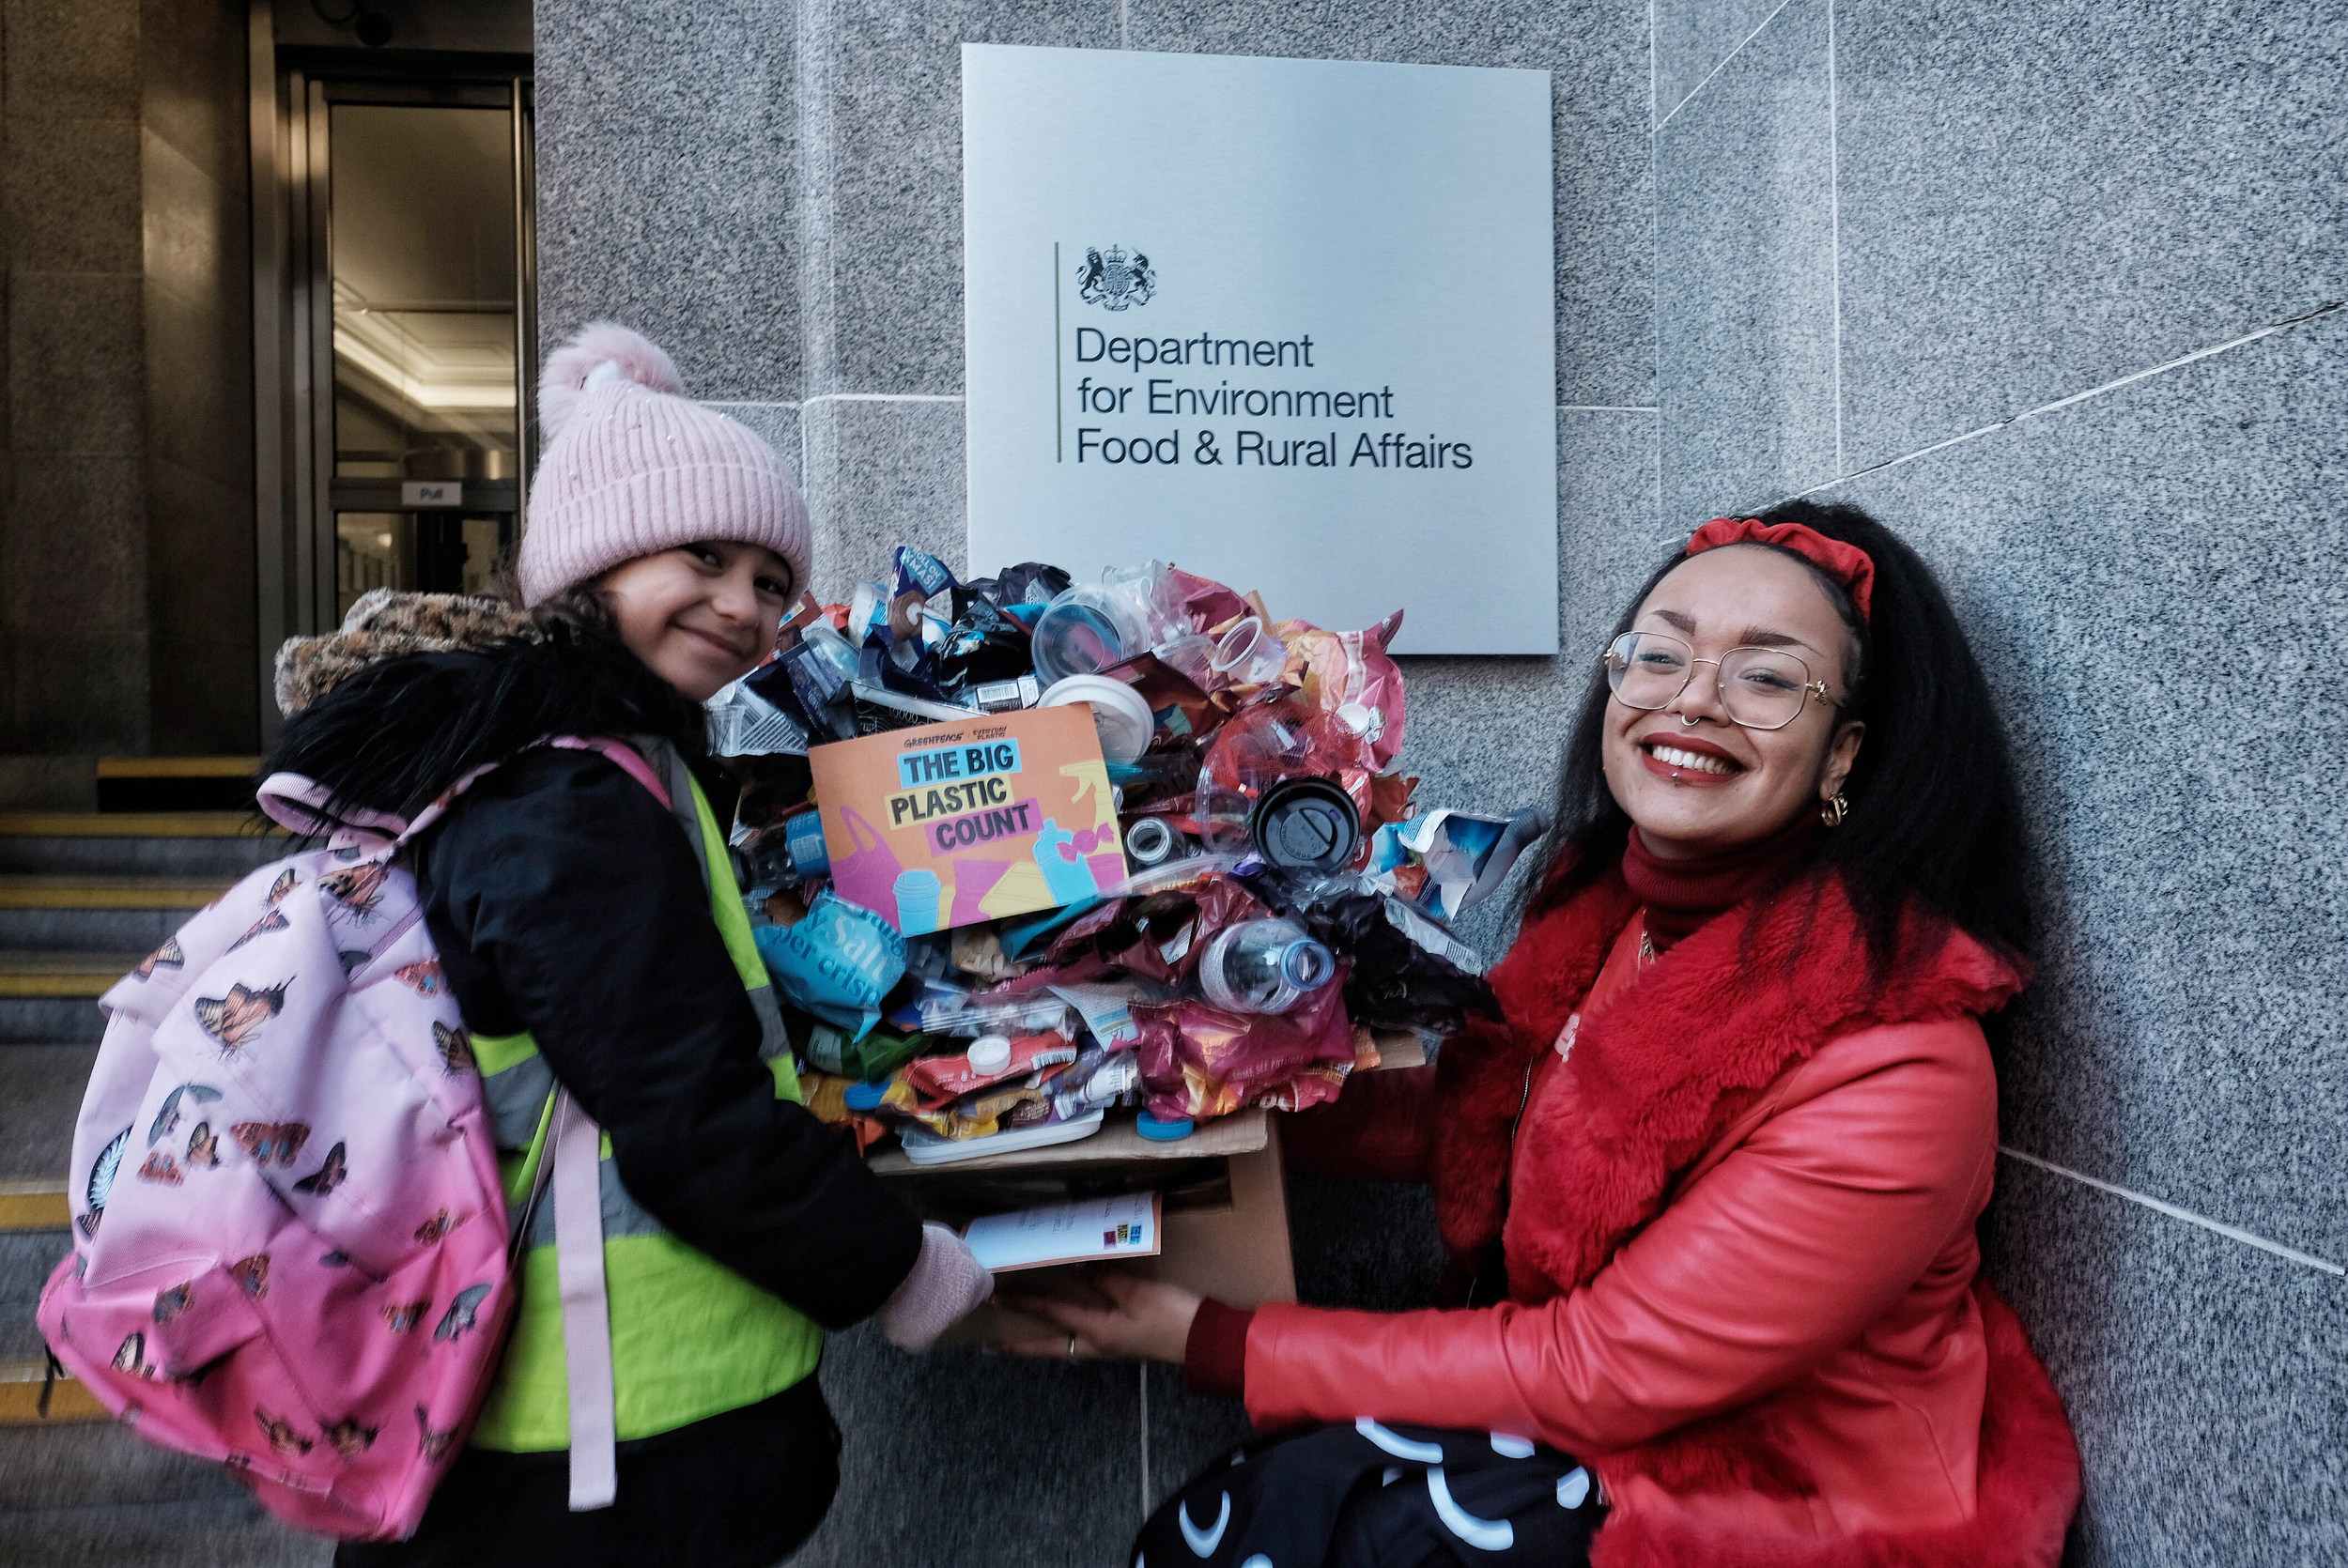 A woman in red with long black hair and glasses smiles with young girl in a high viz with a ptin bobble hat and backpack. They are holding a box piles high and overflowing with plastic rubbish, with a flyer on it reading 'The Big PLastic Count'. They are stading in front of the Department for Environment Food and Rural Affairs